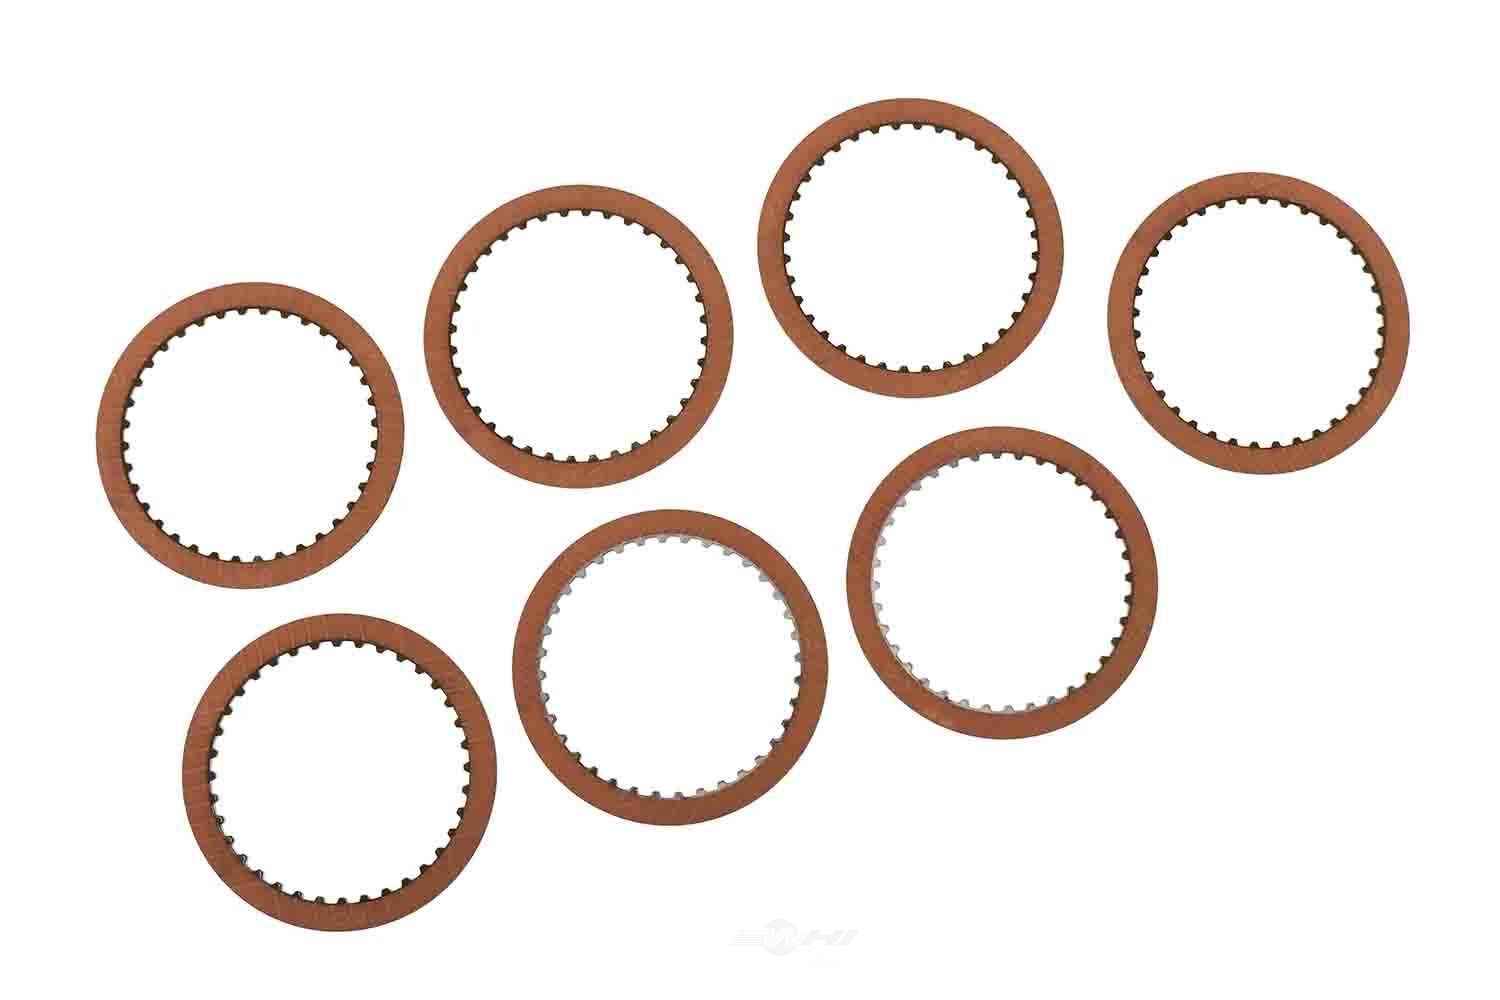 GM GENUINE PARTS - Transmission Clutch Friction Plate - GMP 24224158